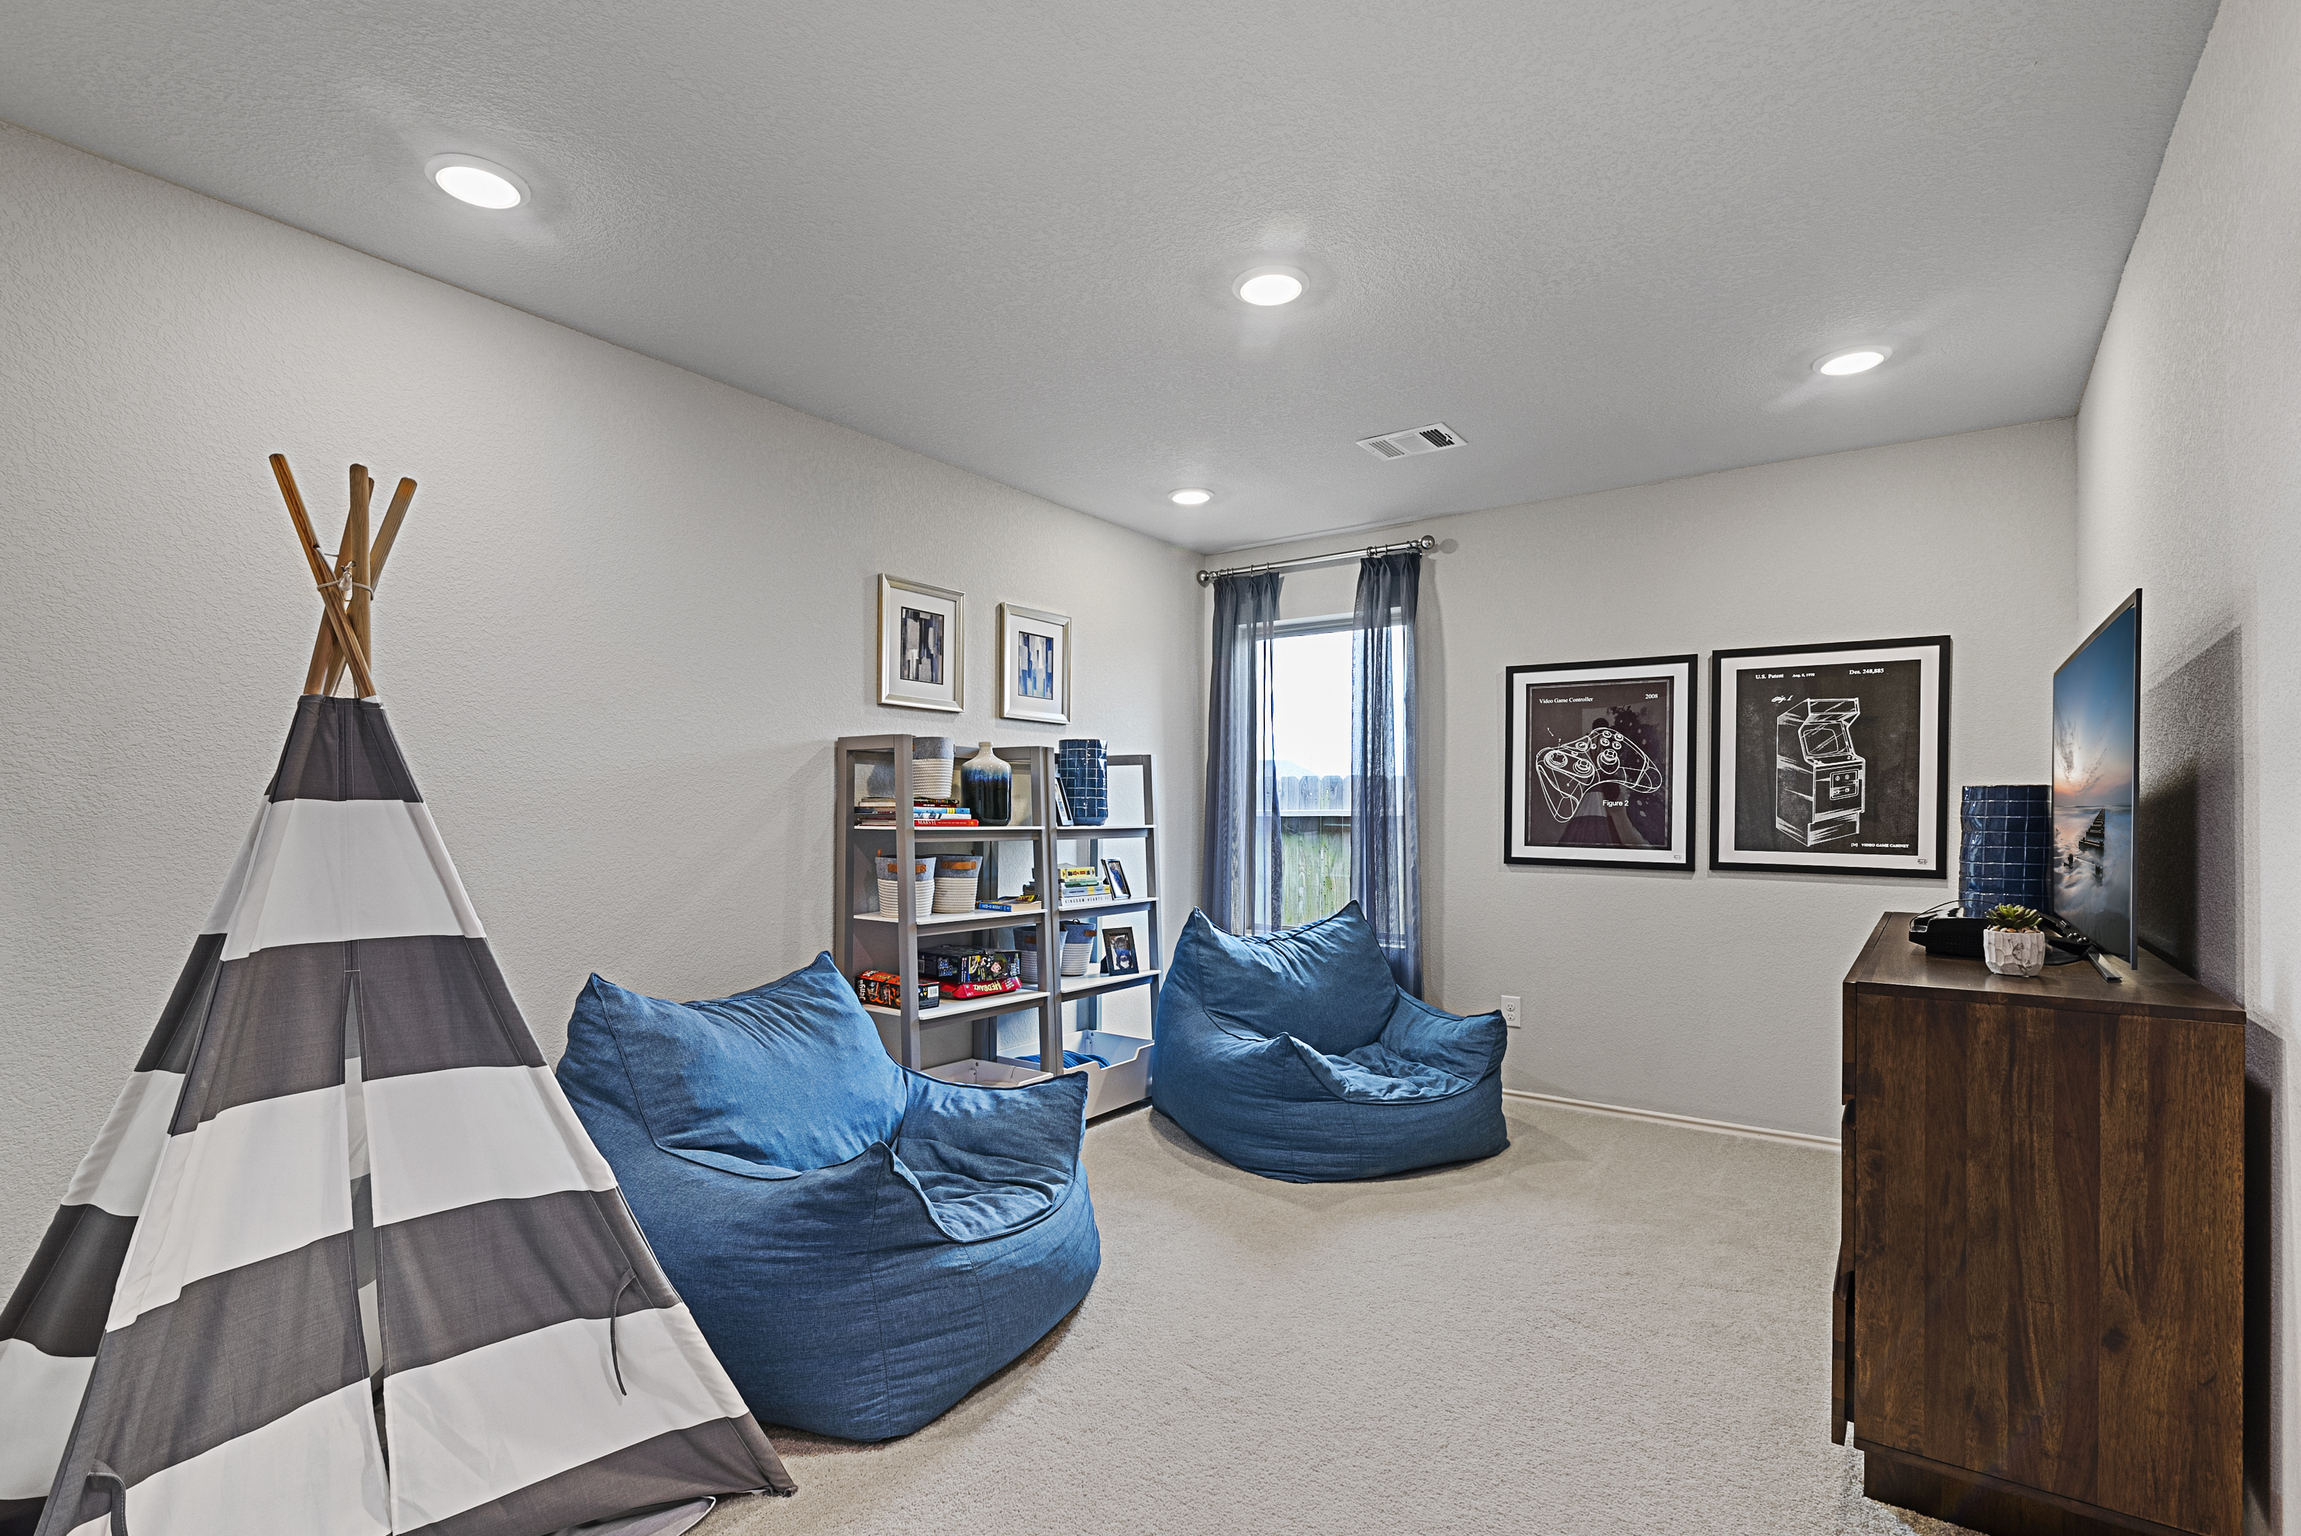 Play Room With Bean Bag Chairs and Tent